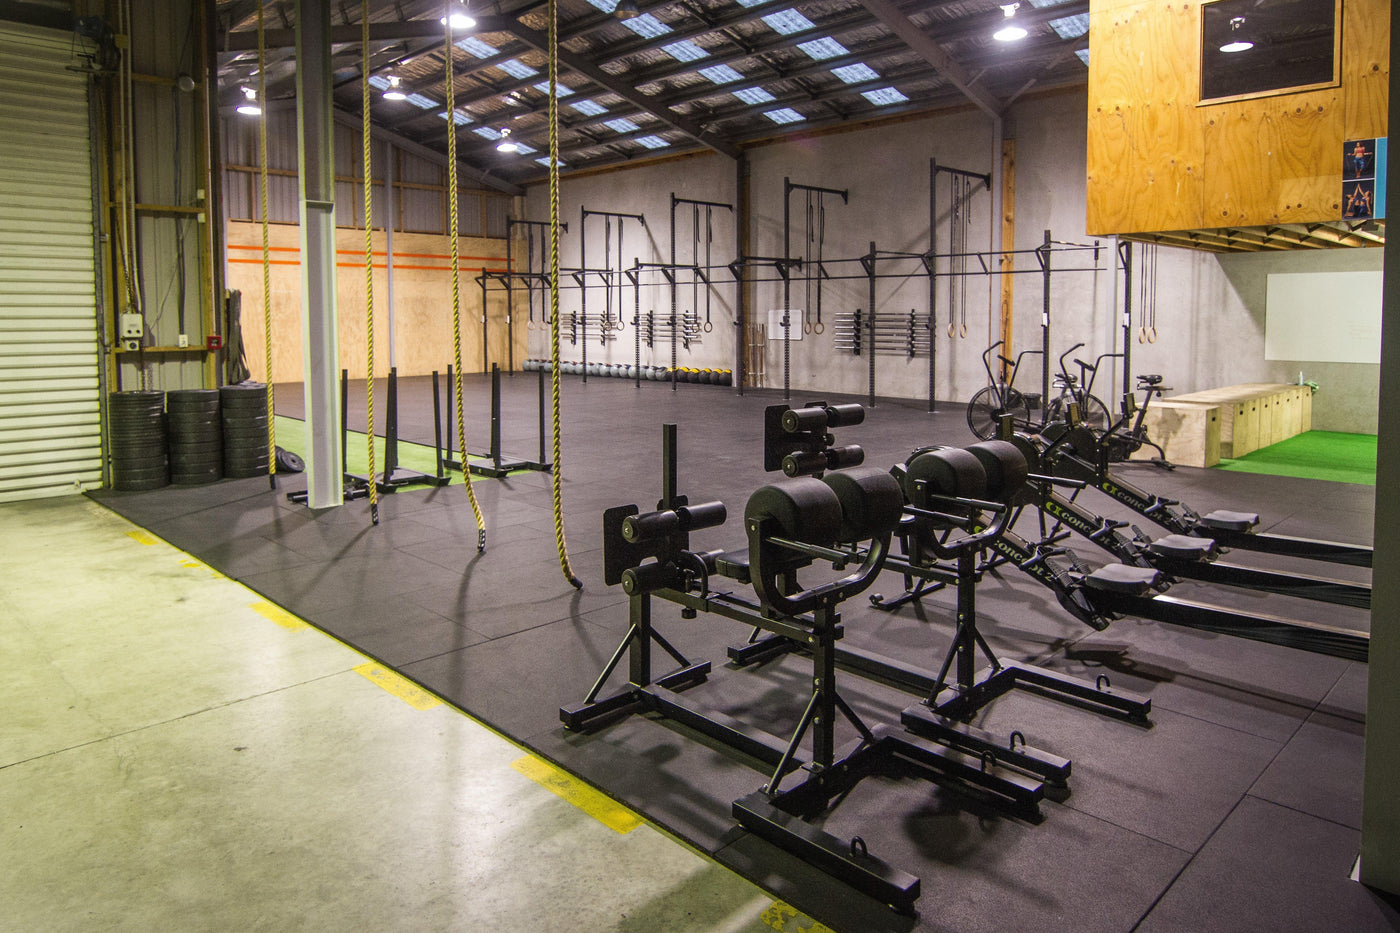 Our community of CrossFit boxes - Industrial Athletic